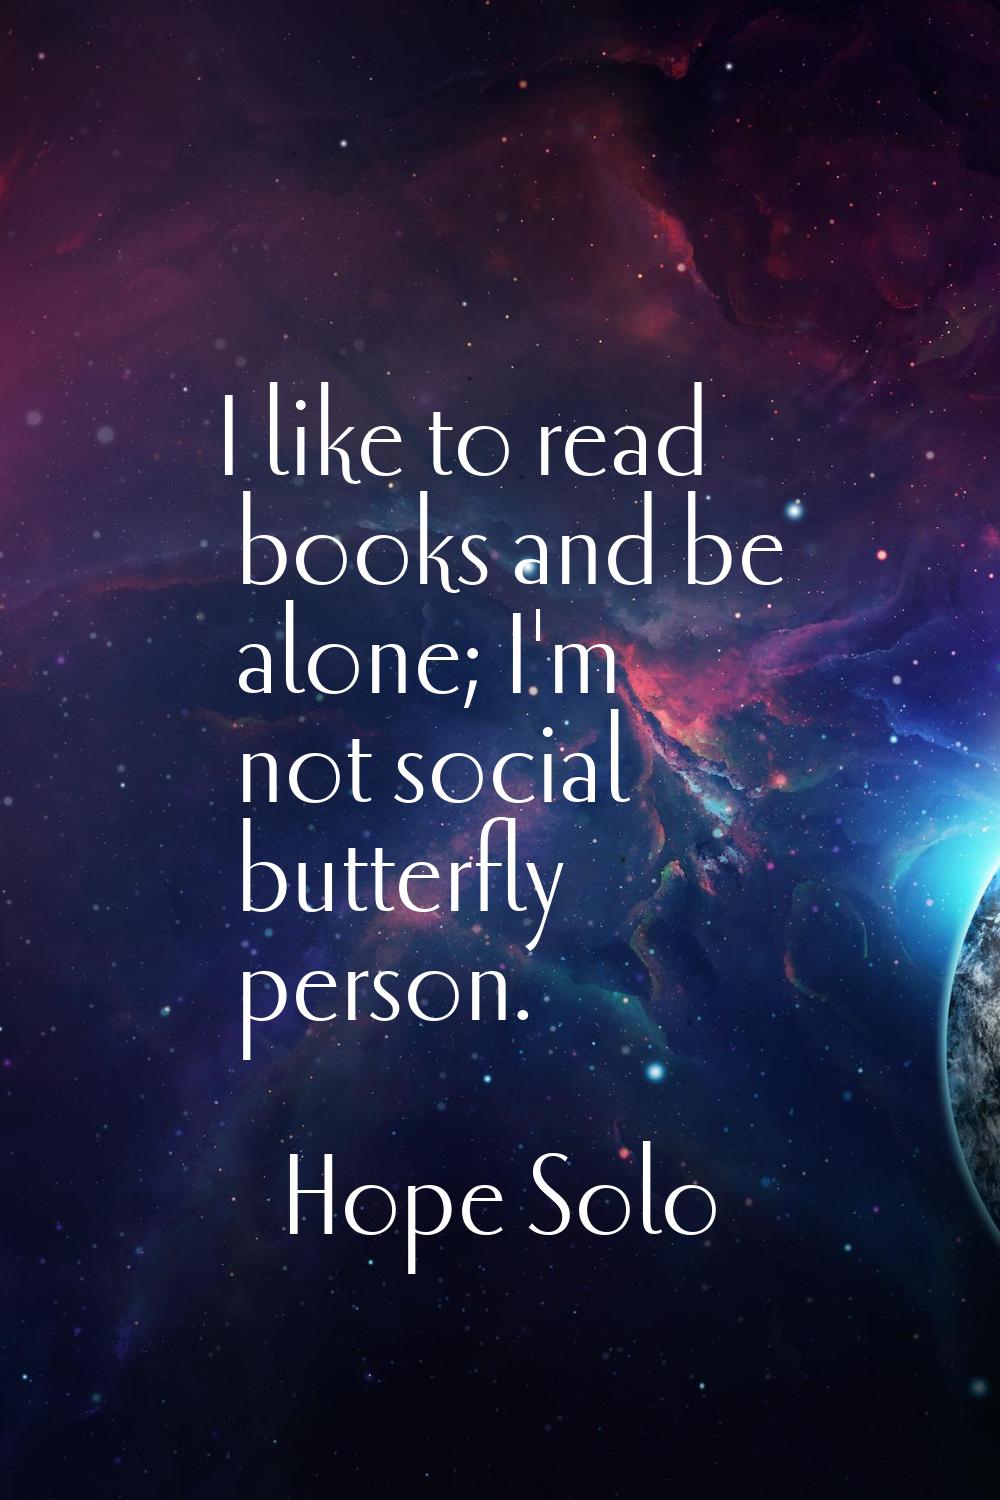 I like to read books and be alone; I'm not social butterfly person.